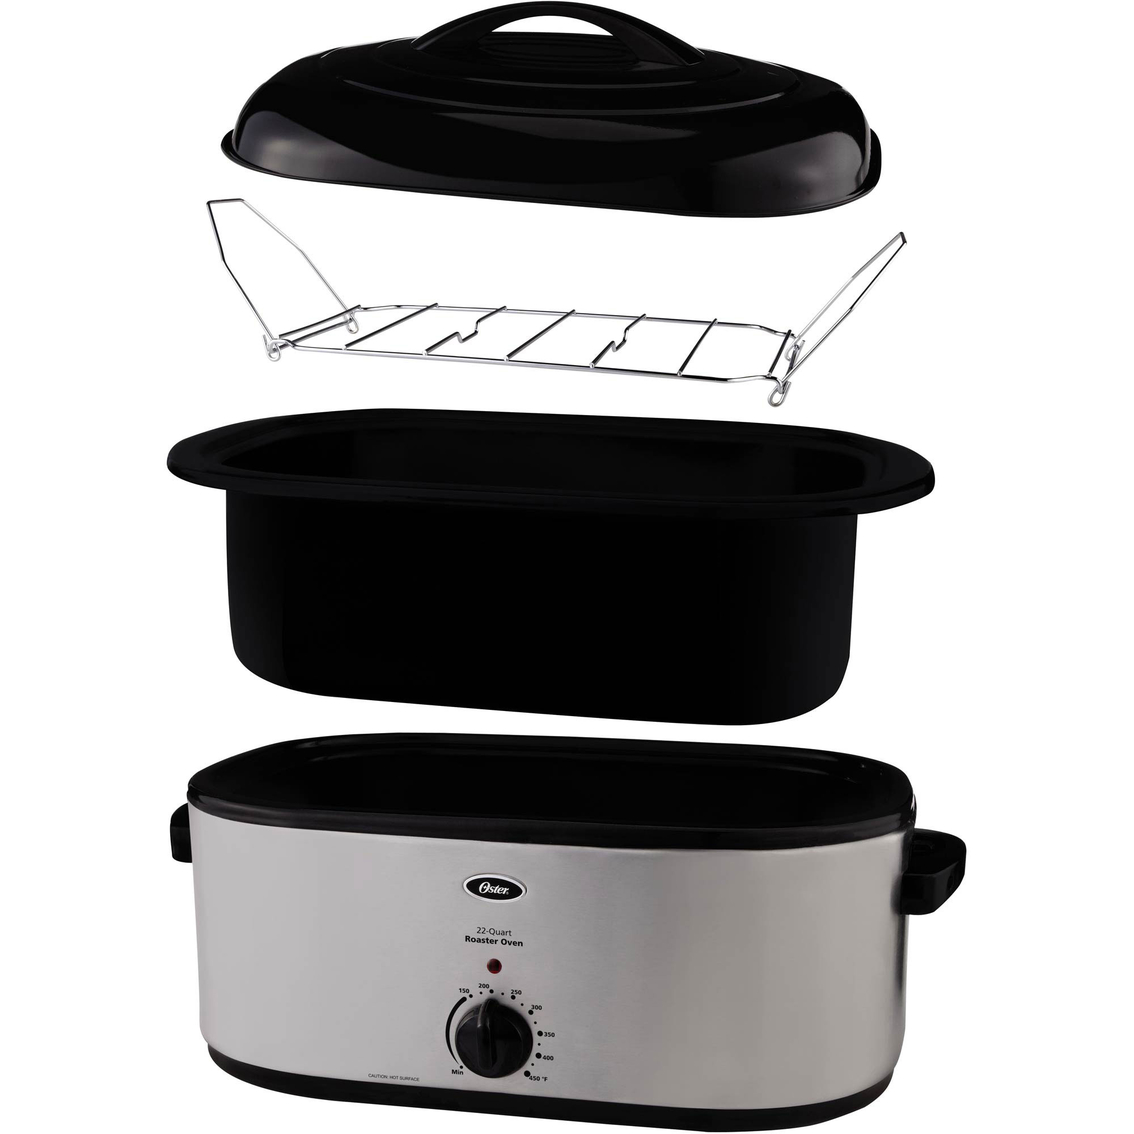 Oster Roaster Oven Self-Basting Lid Stainless Steel Review 